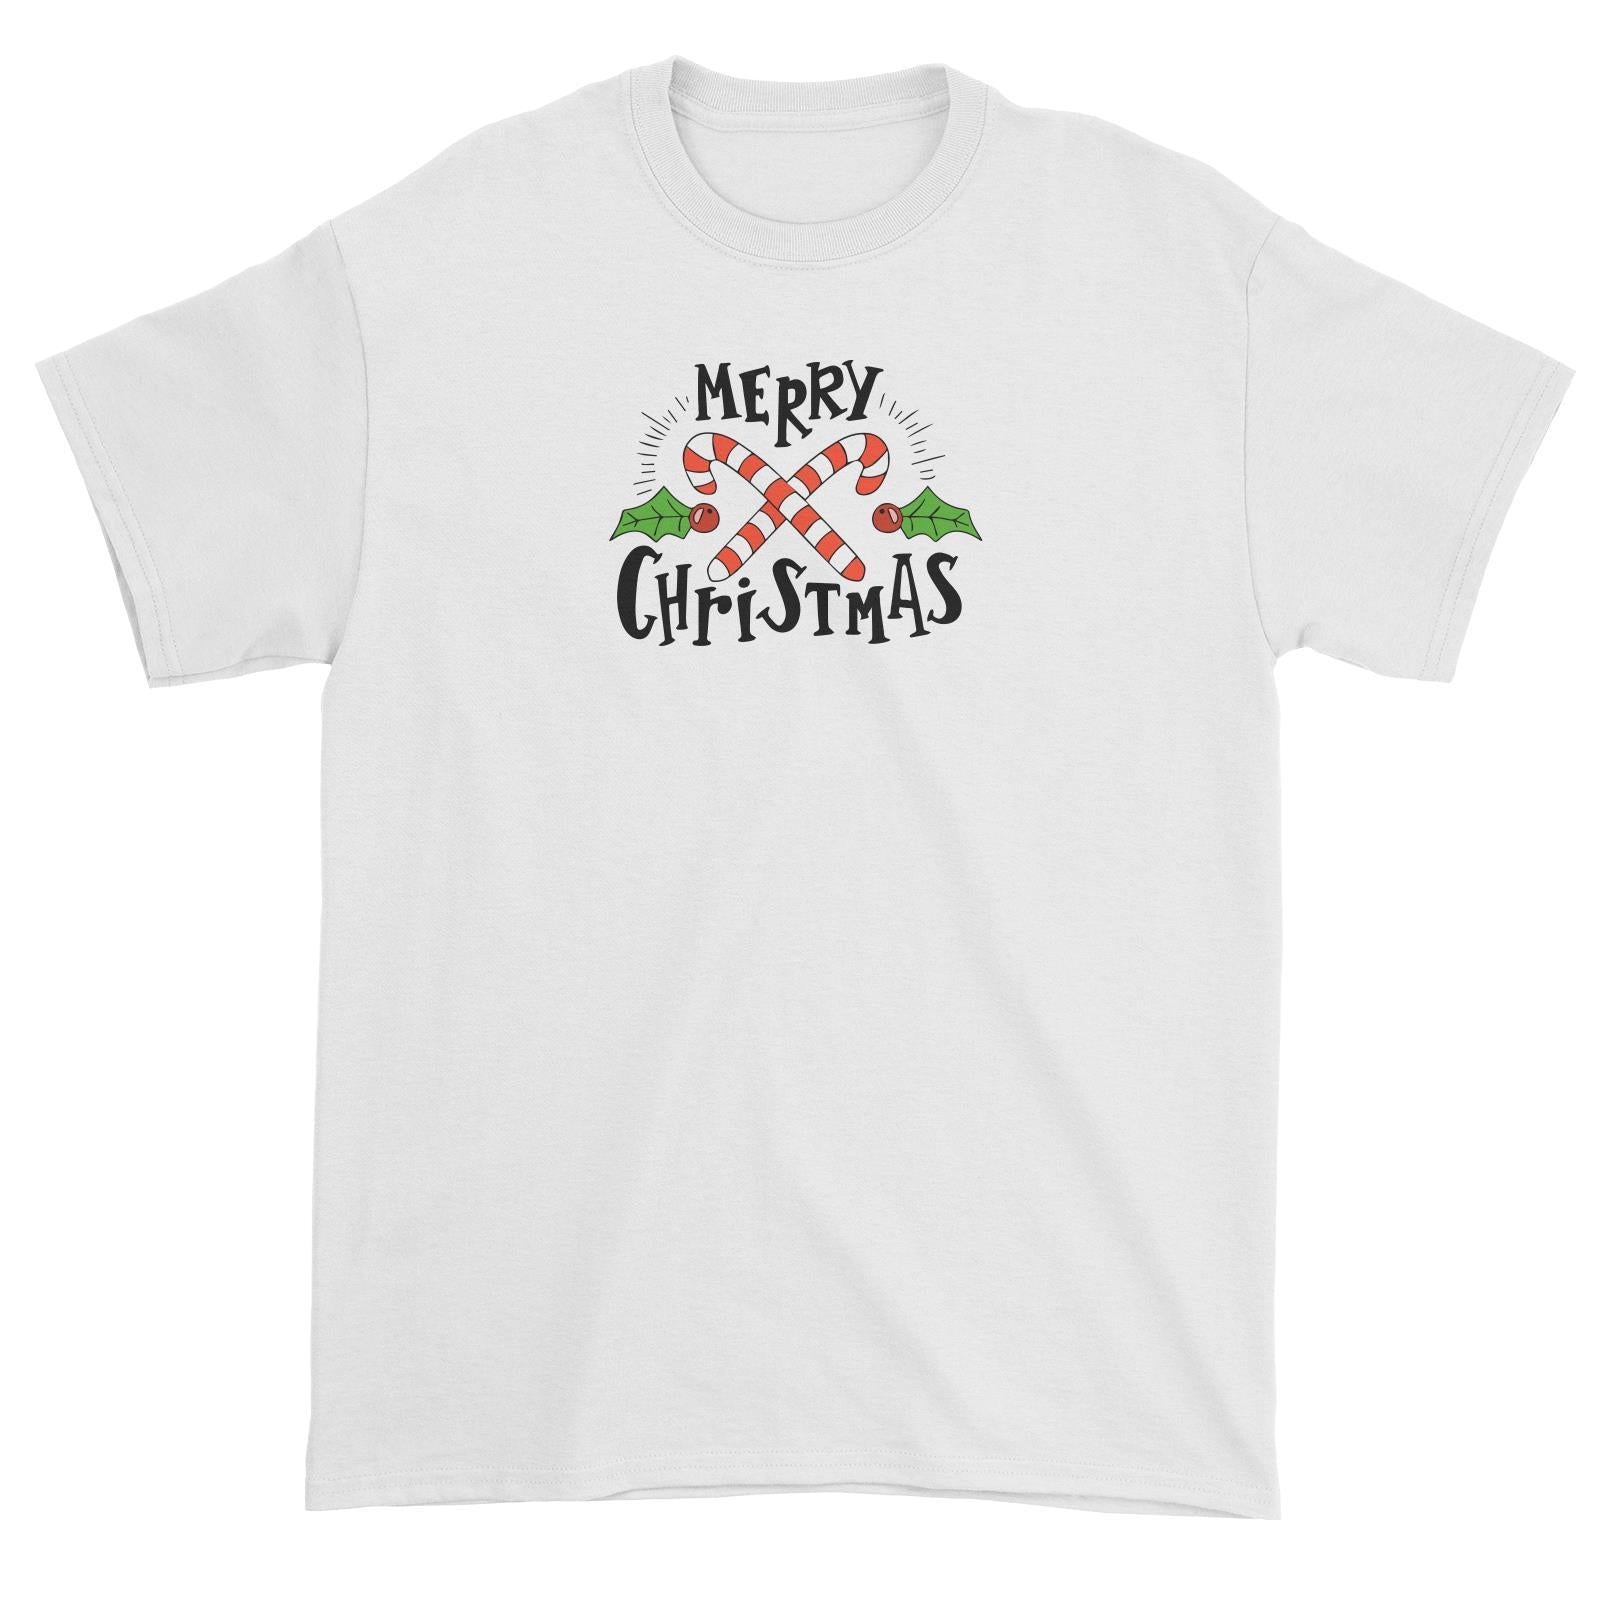 Merry Chrismas with Holly and Candy Cane Greeting Unisex T-Shirt Christmas Matching Family Lettering